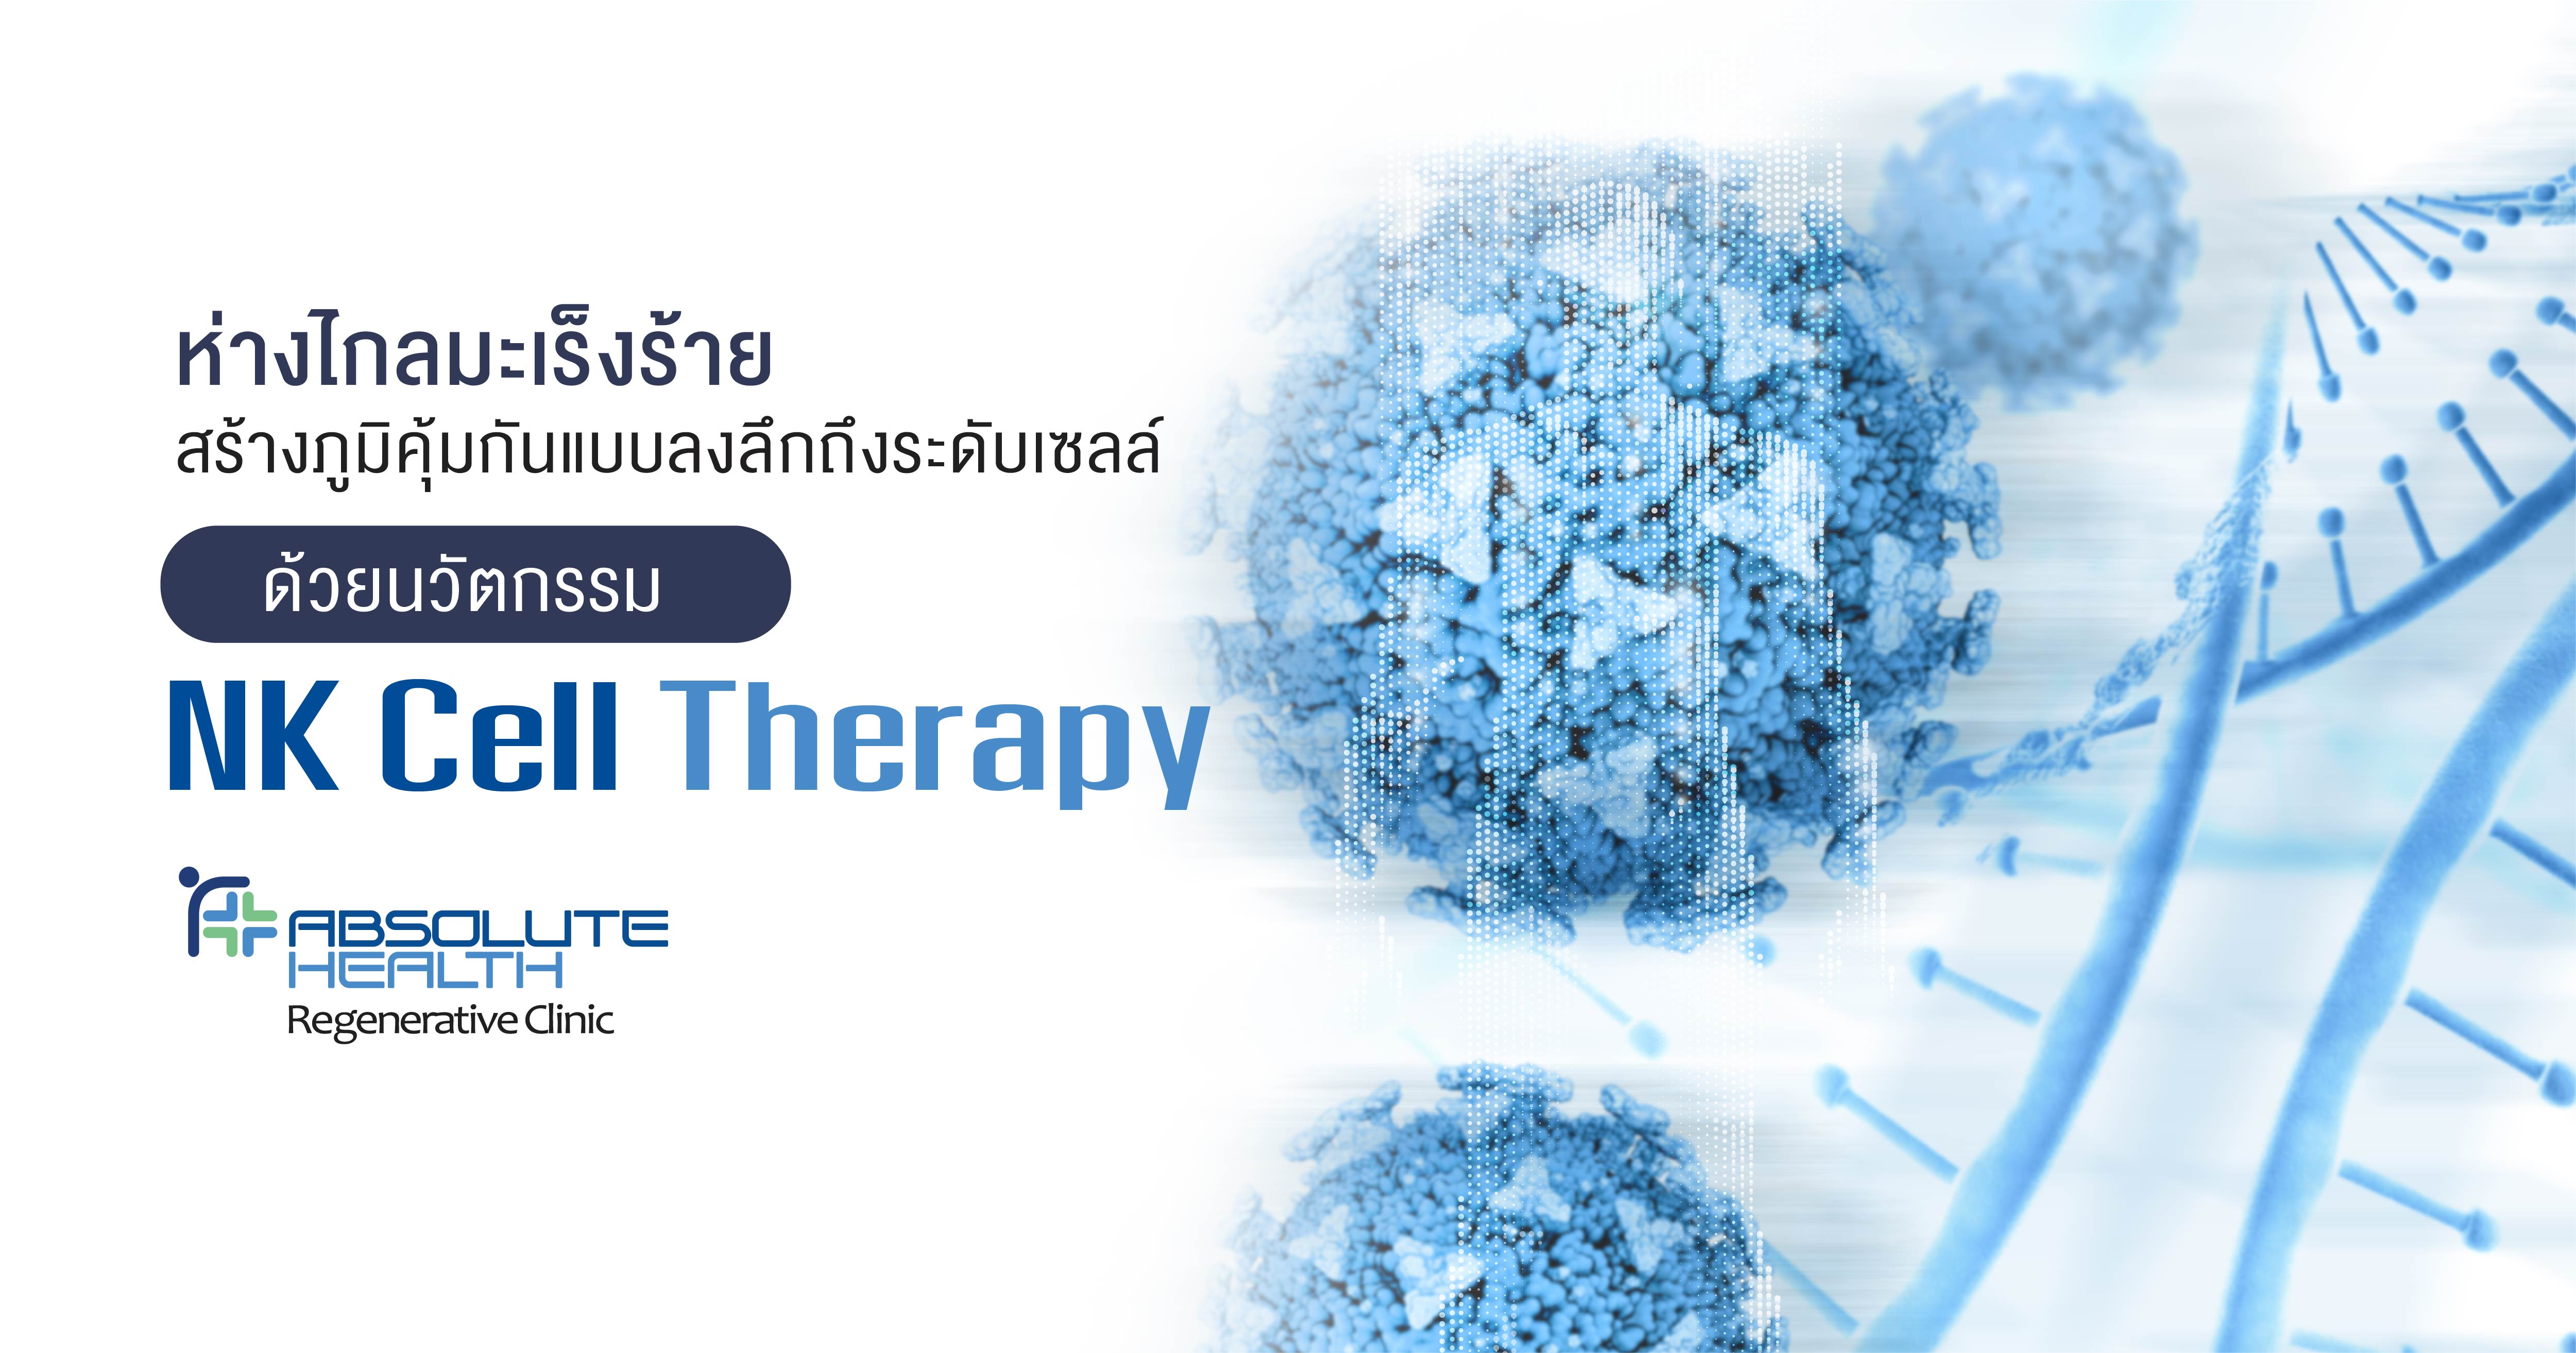 Natural Killer (NK) Cell Therapy for Cancer - Building Immunity at the Cellular level